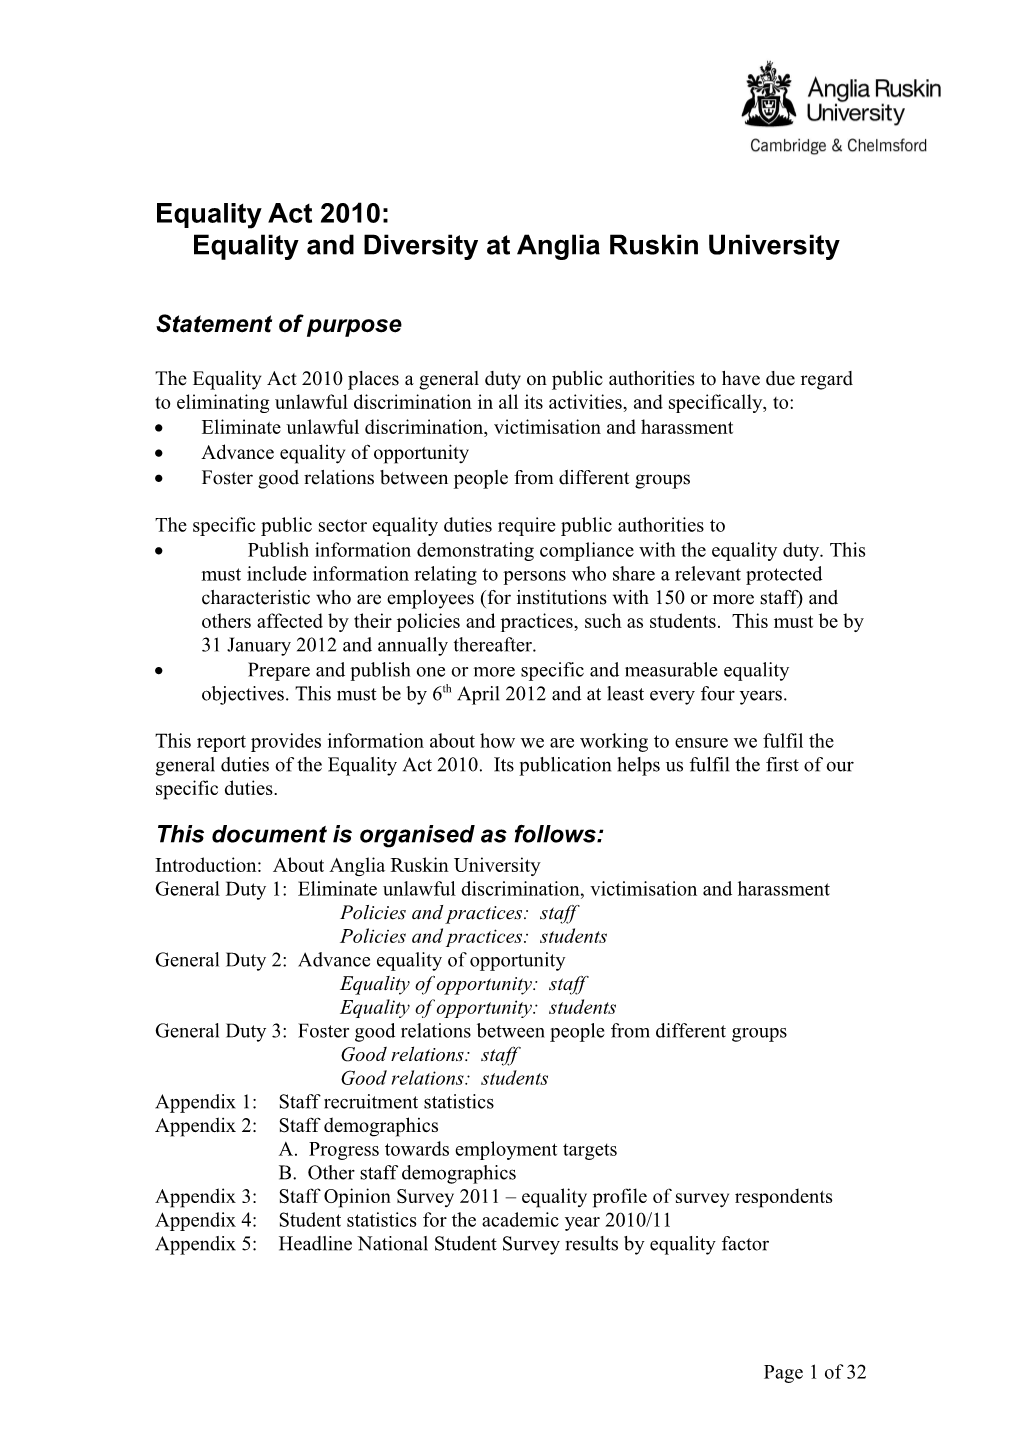 Equality and Diversity at Anglia Ruskin University